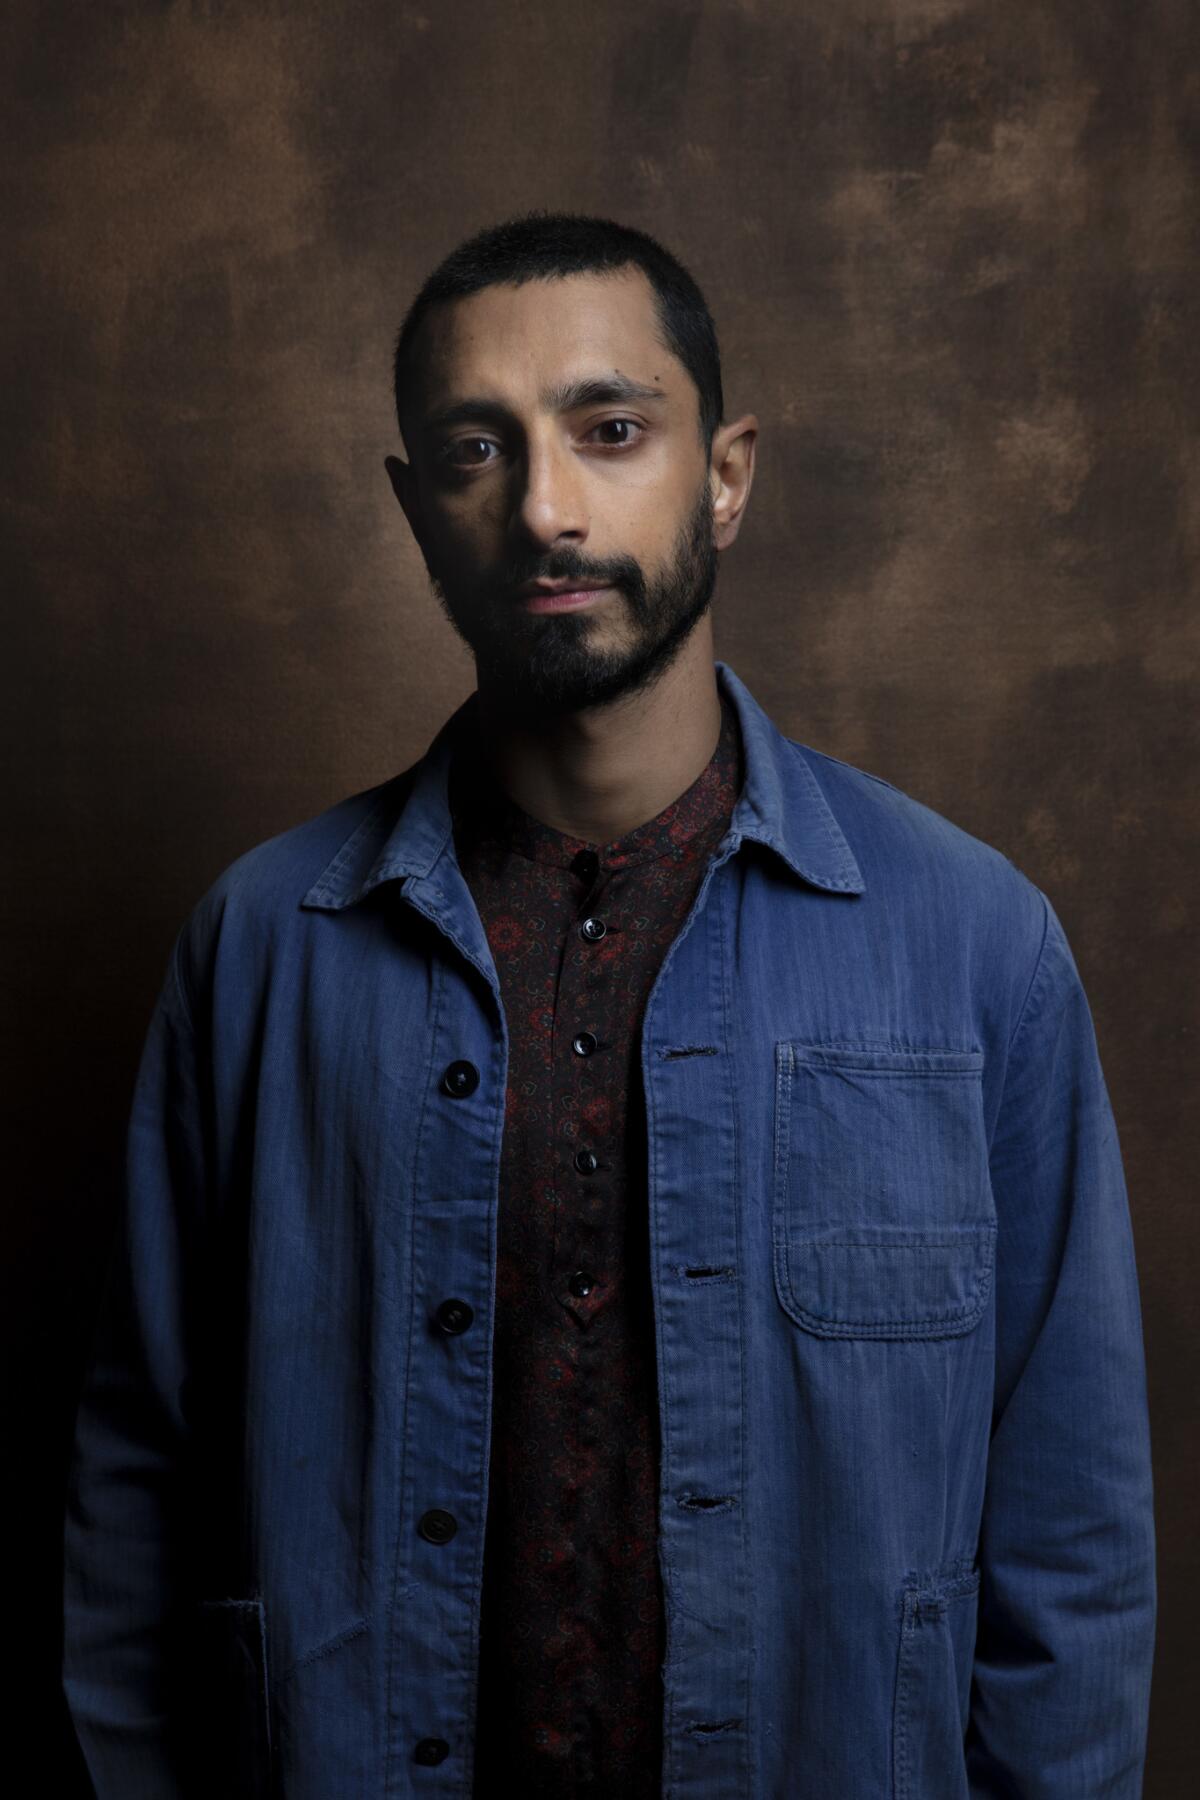 Actor Riz Ahmed from the film "The Sisters Brothers."